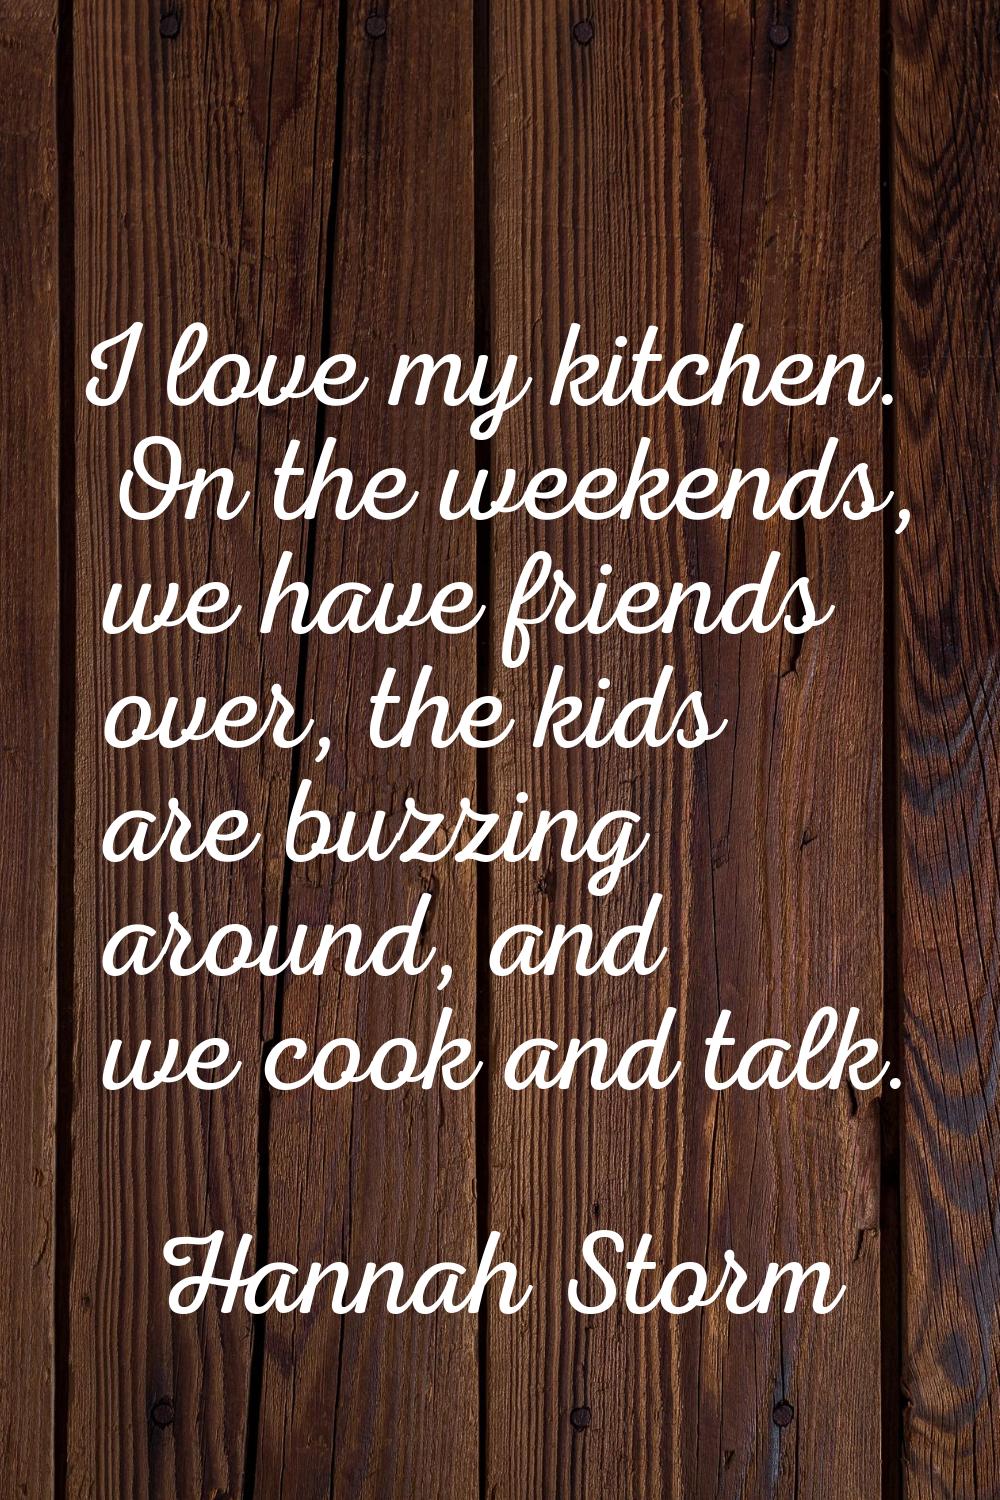 I love my kitchen. On the weekends, we have friends over, the kids are buzzing around, and we cook 